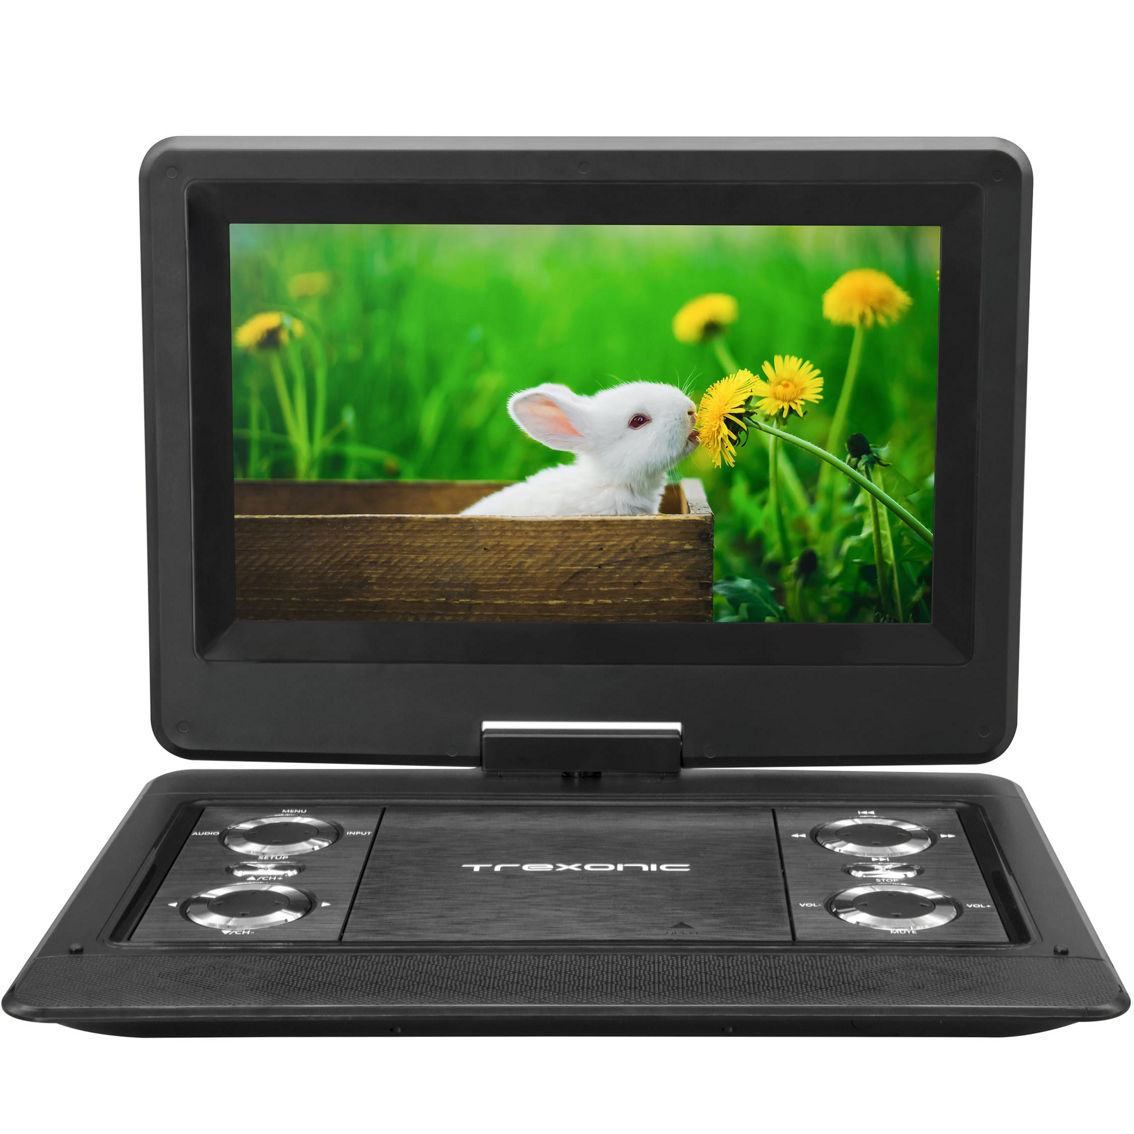 Trexonic 12.5 Inch Portable TV+DVD Player with Color TFT LED Screen and USB/HD/A - Image 2 of 5